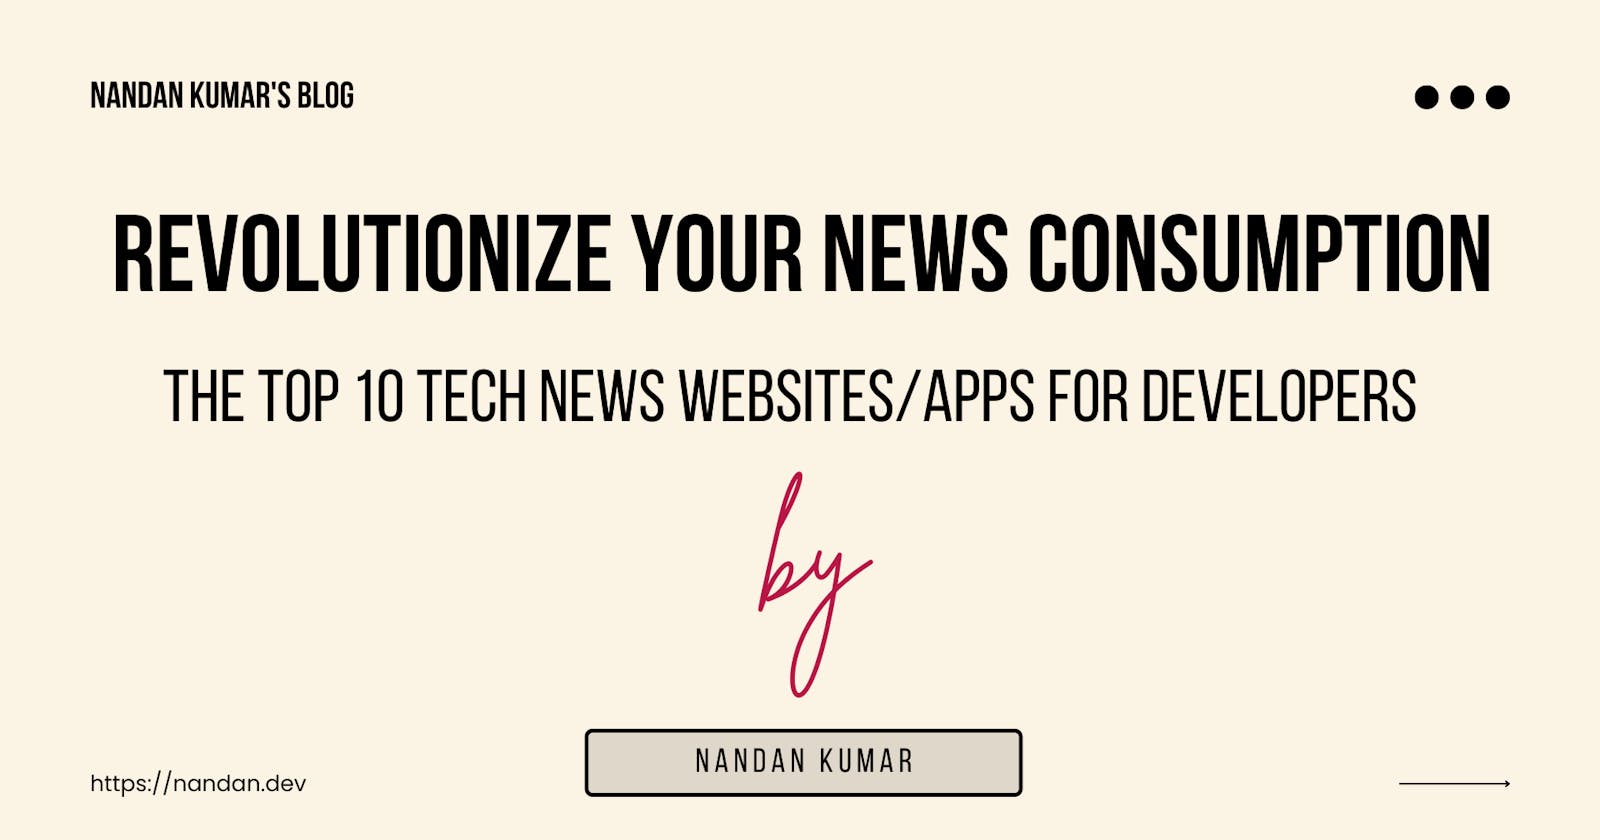 Revolutionize Your News Consumption: The Top 10 Tech News Websites/Apps for Developers